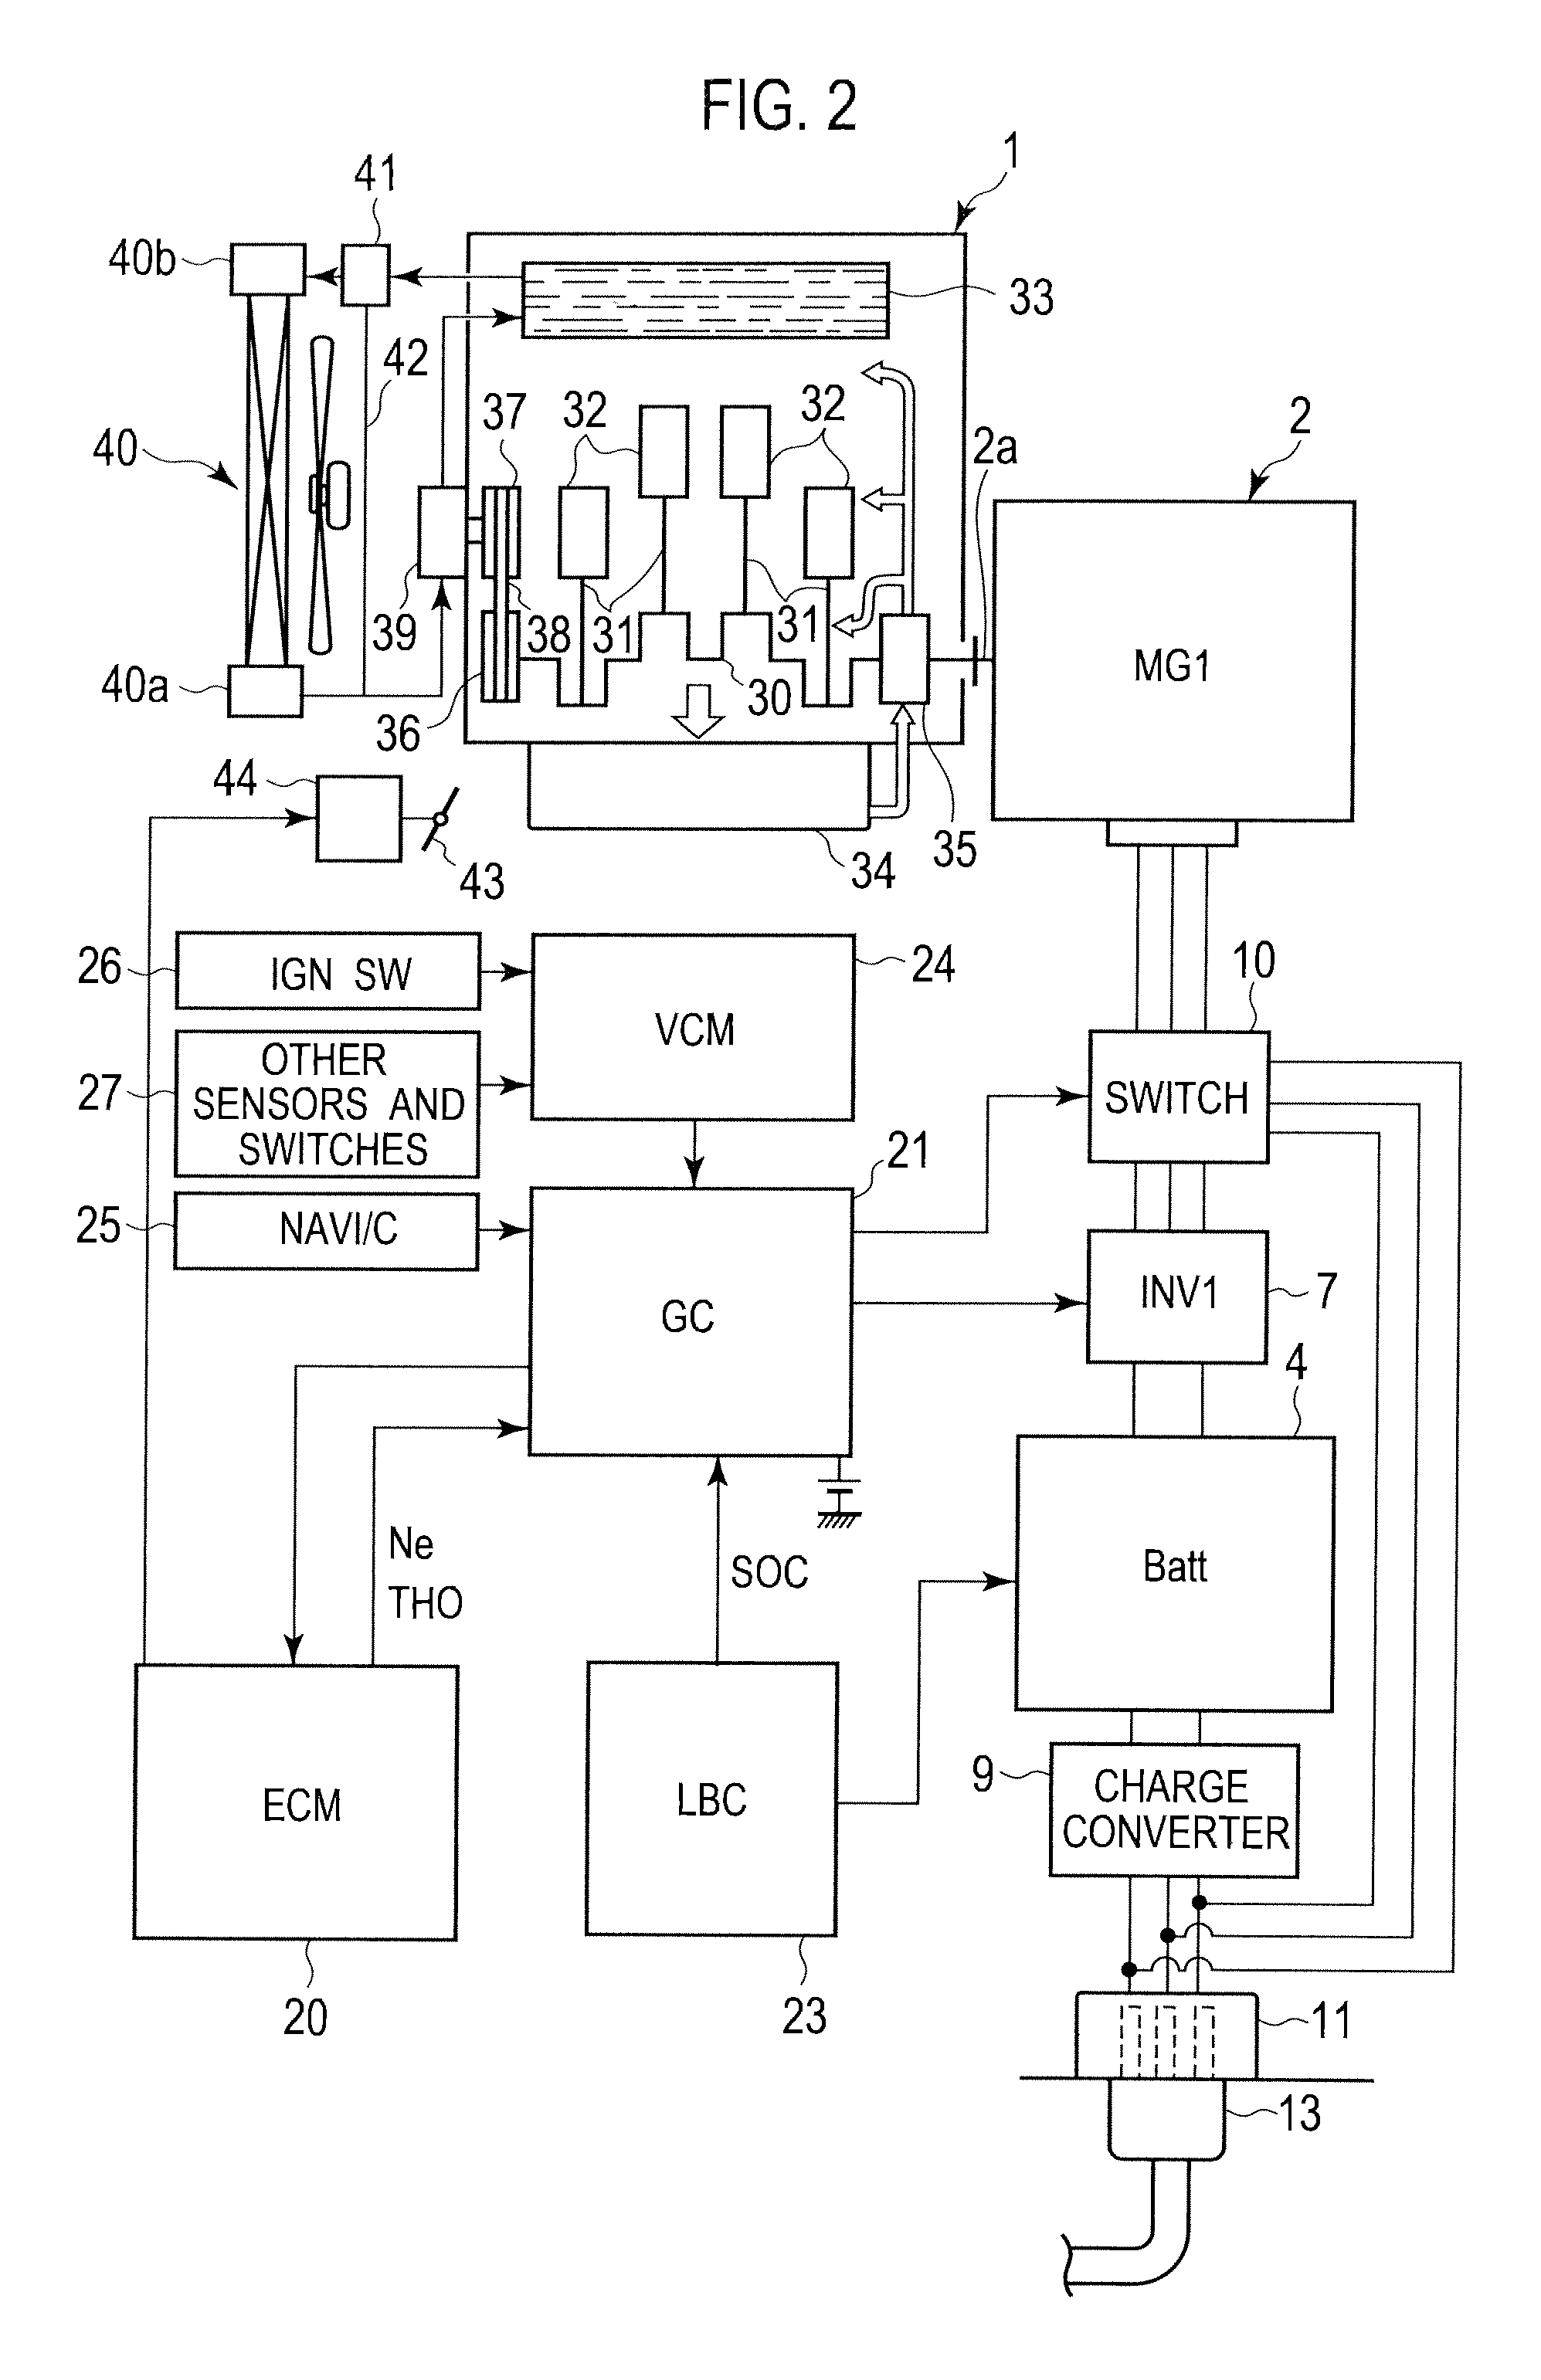 Control system of hybrid vehicle